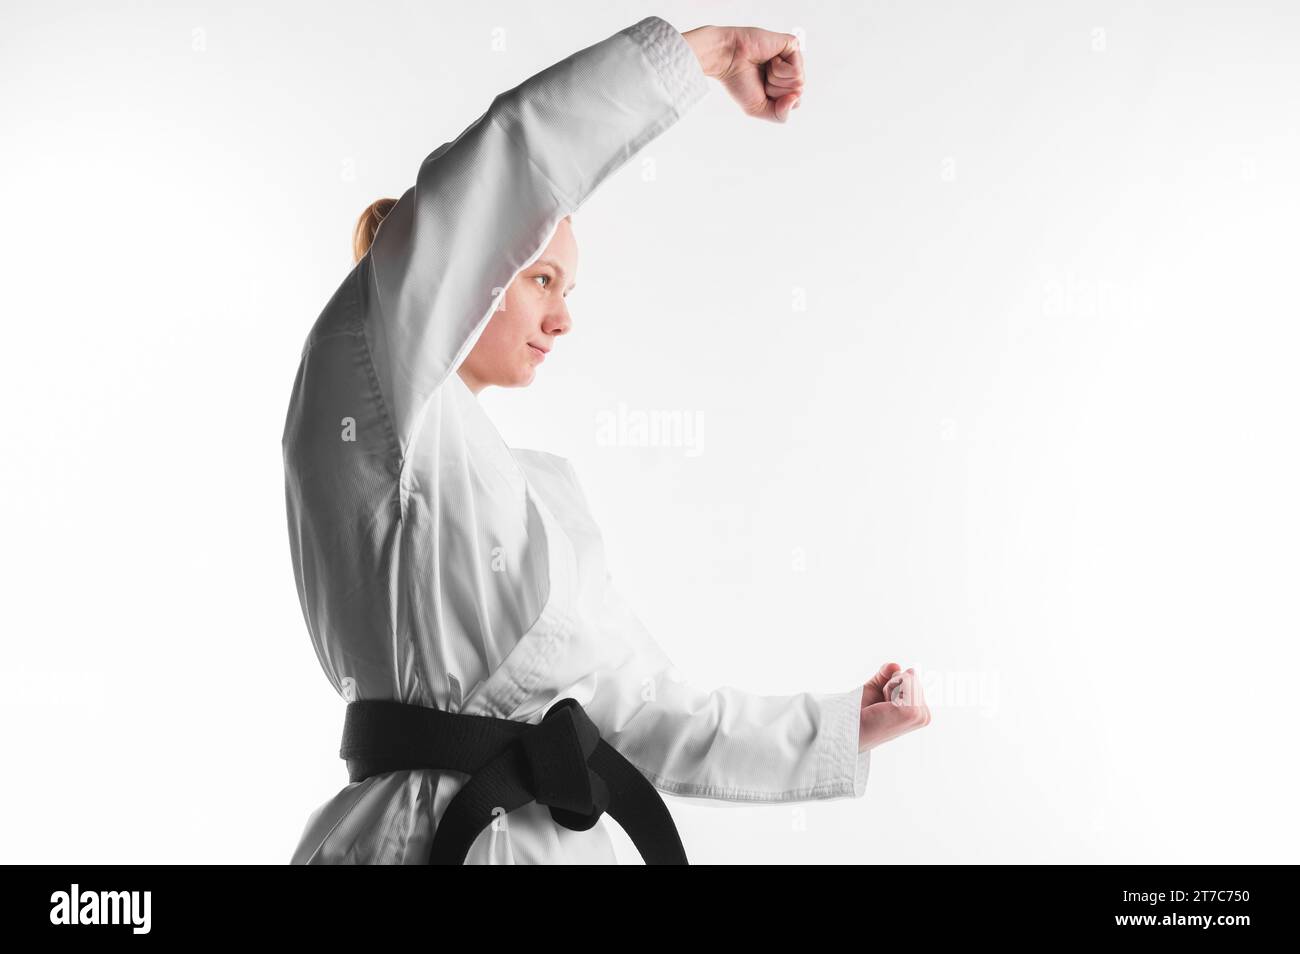 Karate fighter posing side view Stock Photo